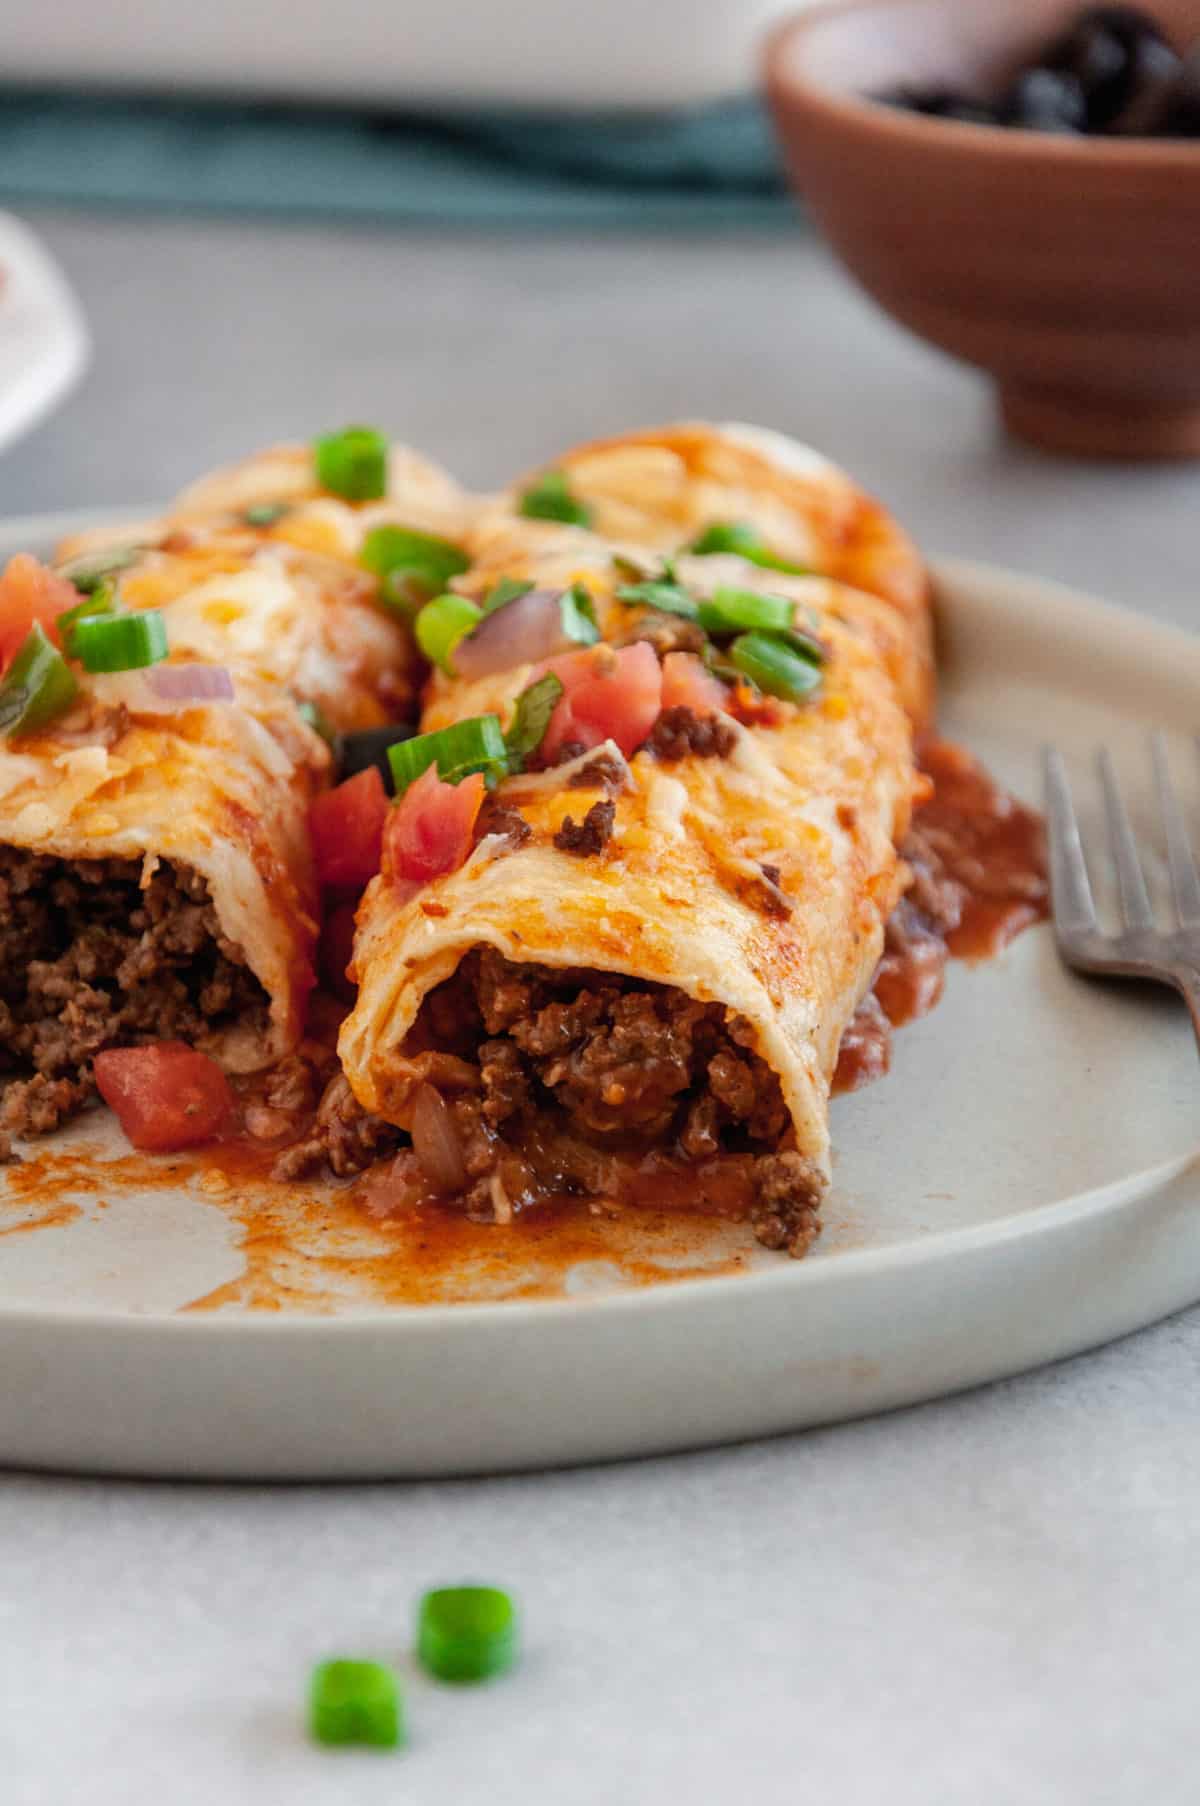 two beef enchiladas with red sauce, shredded cheddar cheese, tomatoes and green onions served on a plate